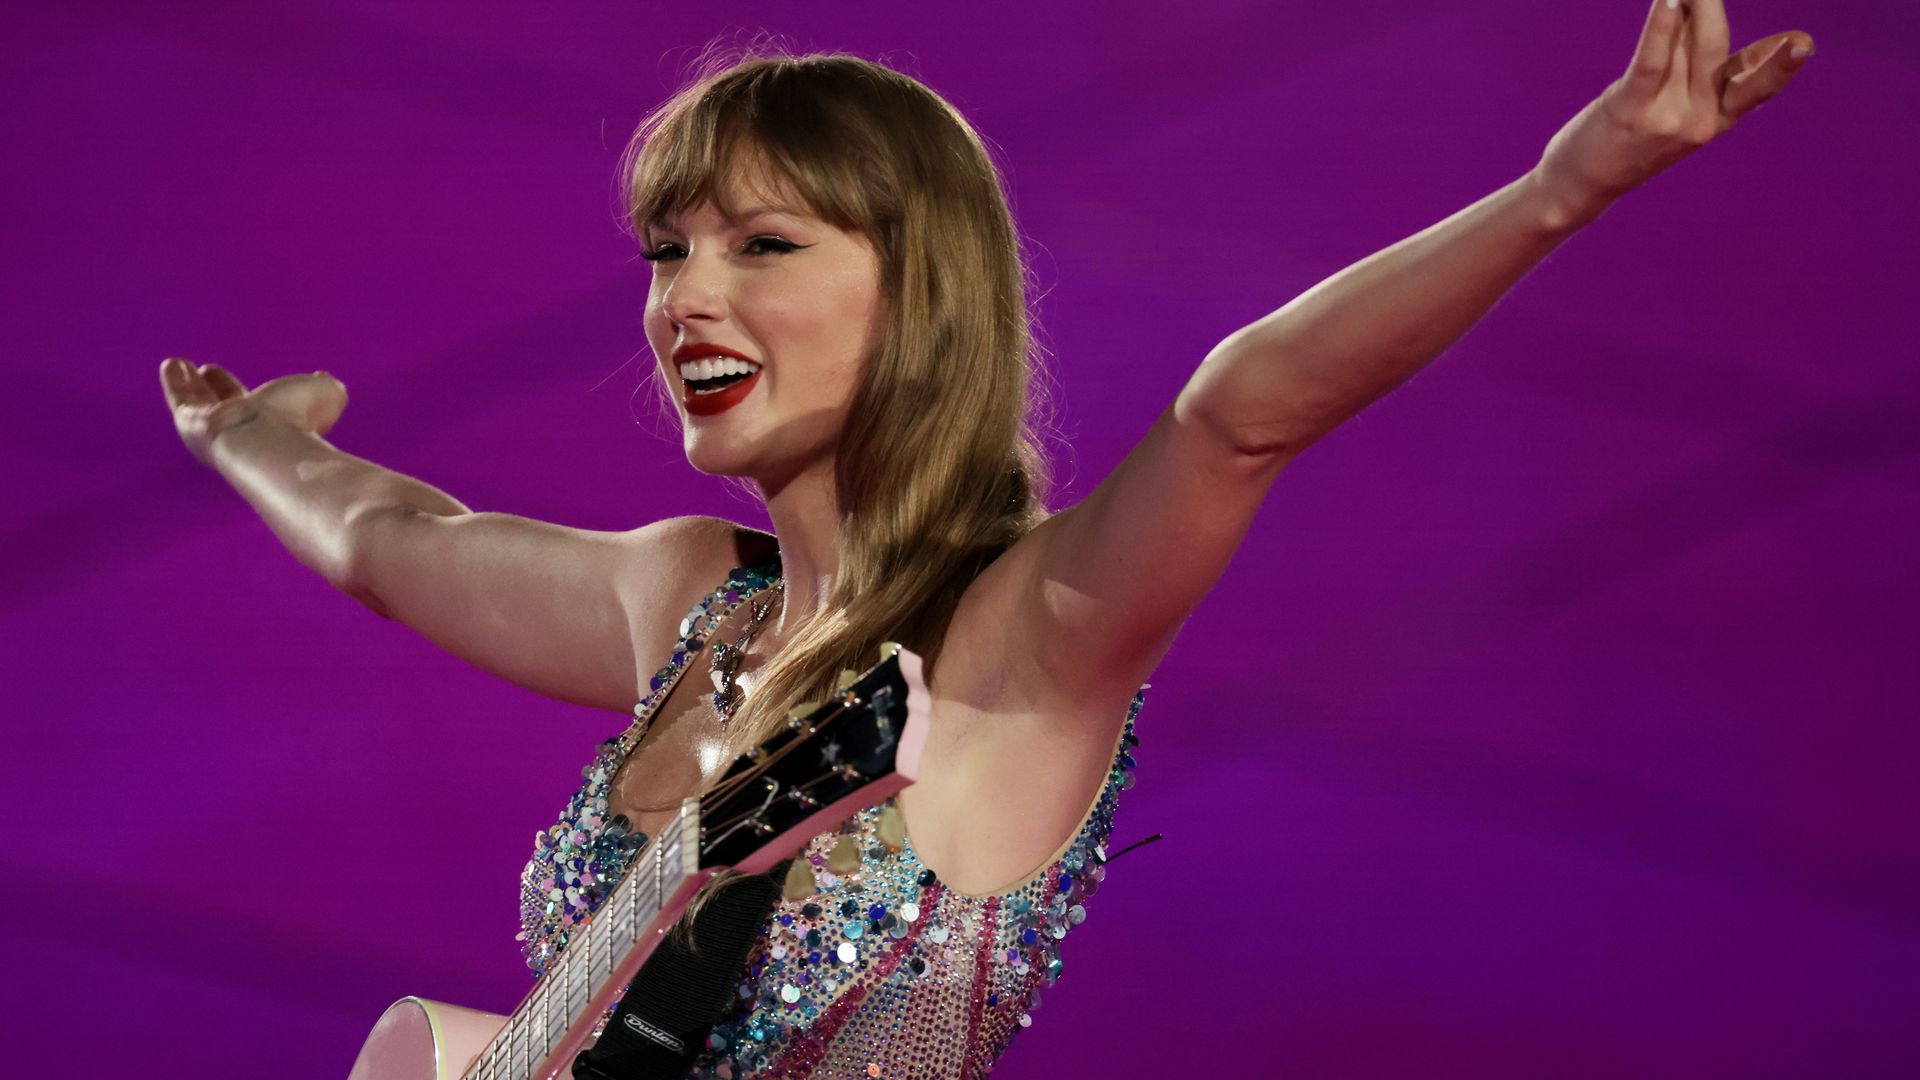 All the clues hinting that Taylor Swift may drop TWO albums on April 19 ...